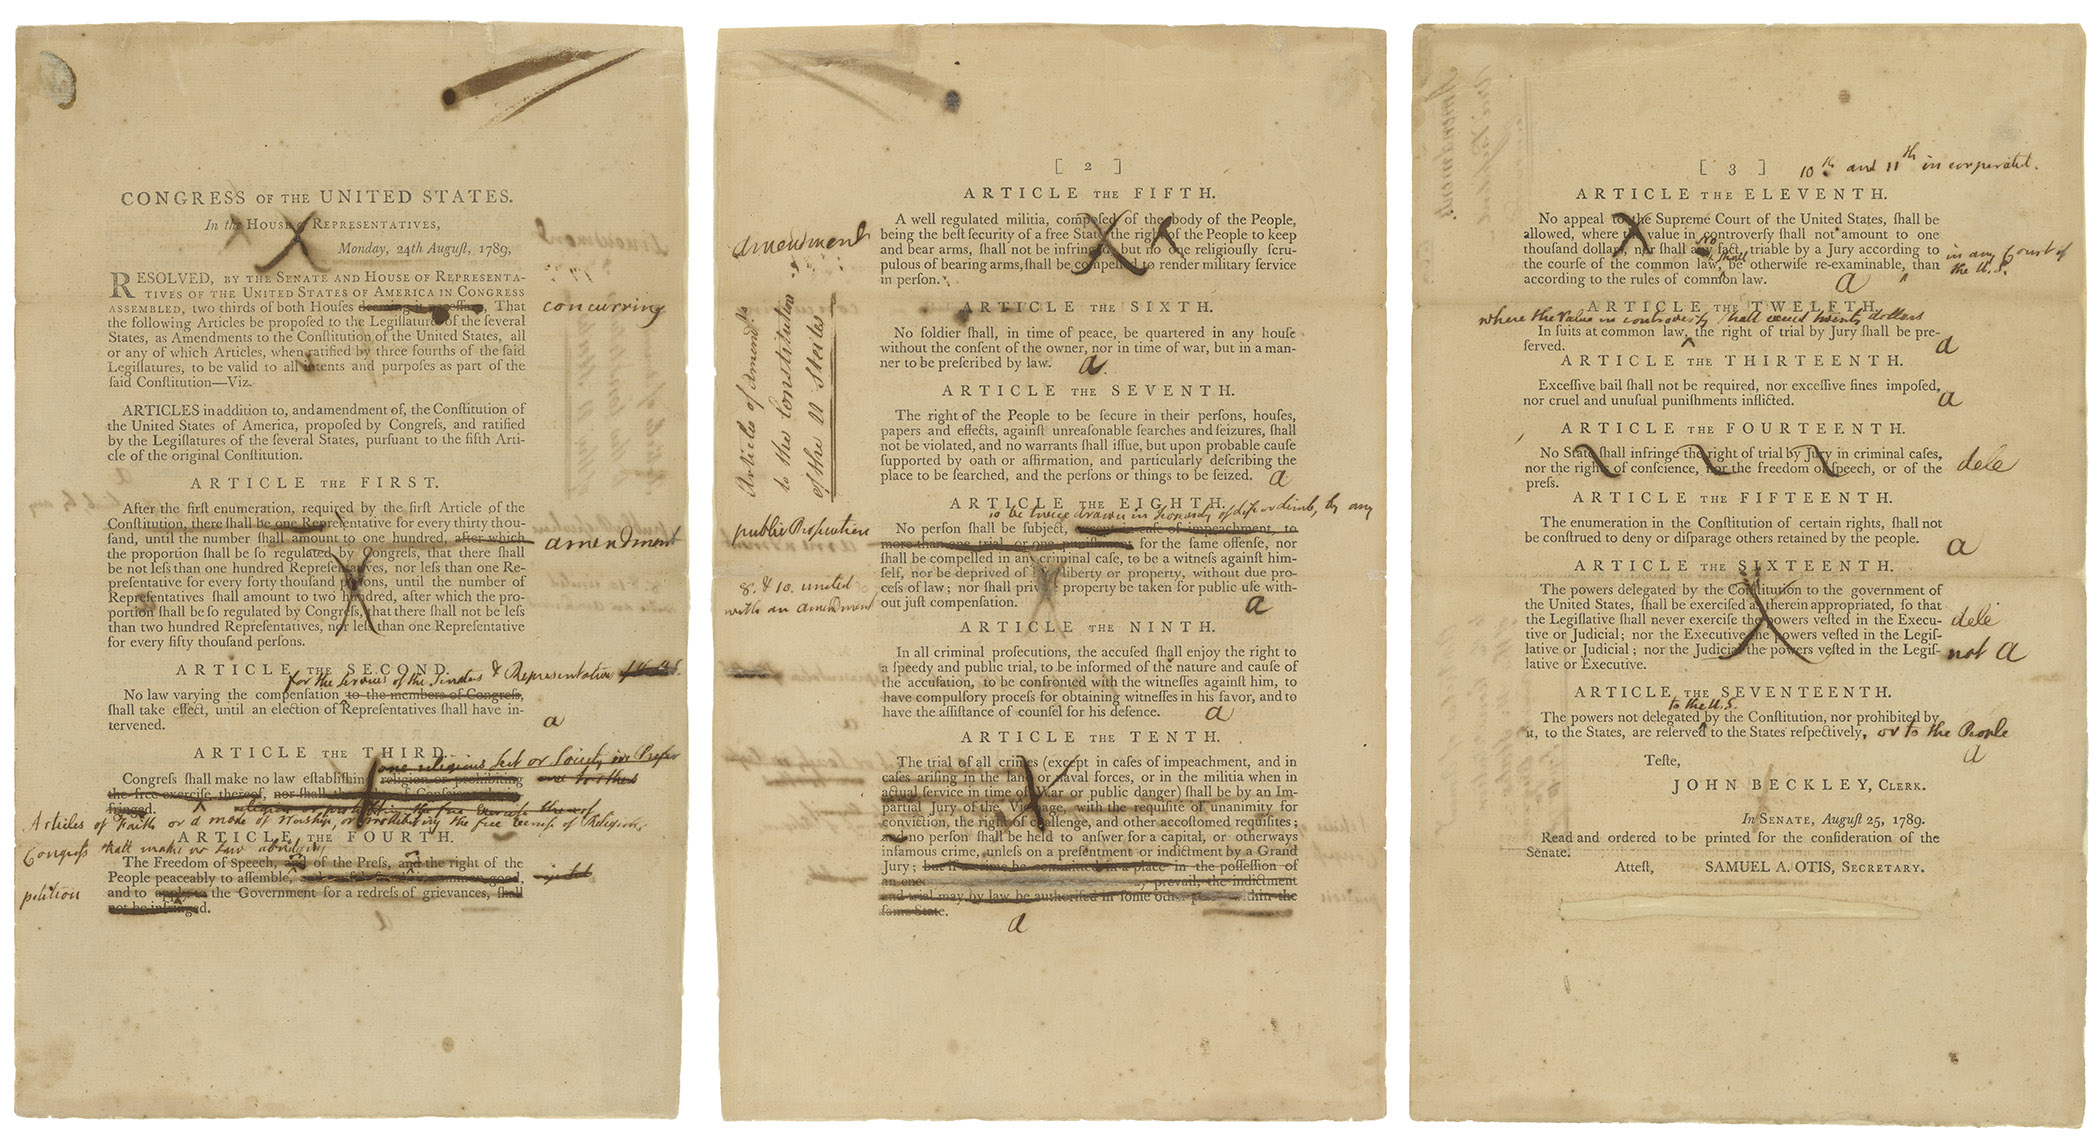 First US ‘Bill Of Rights’ Draft on View for Limited Time at National Archives